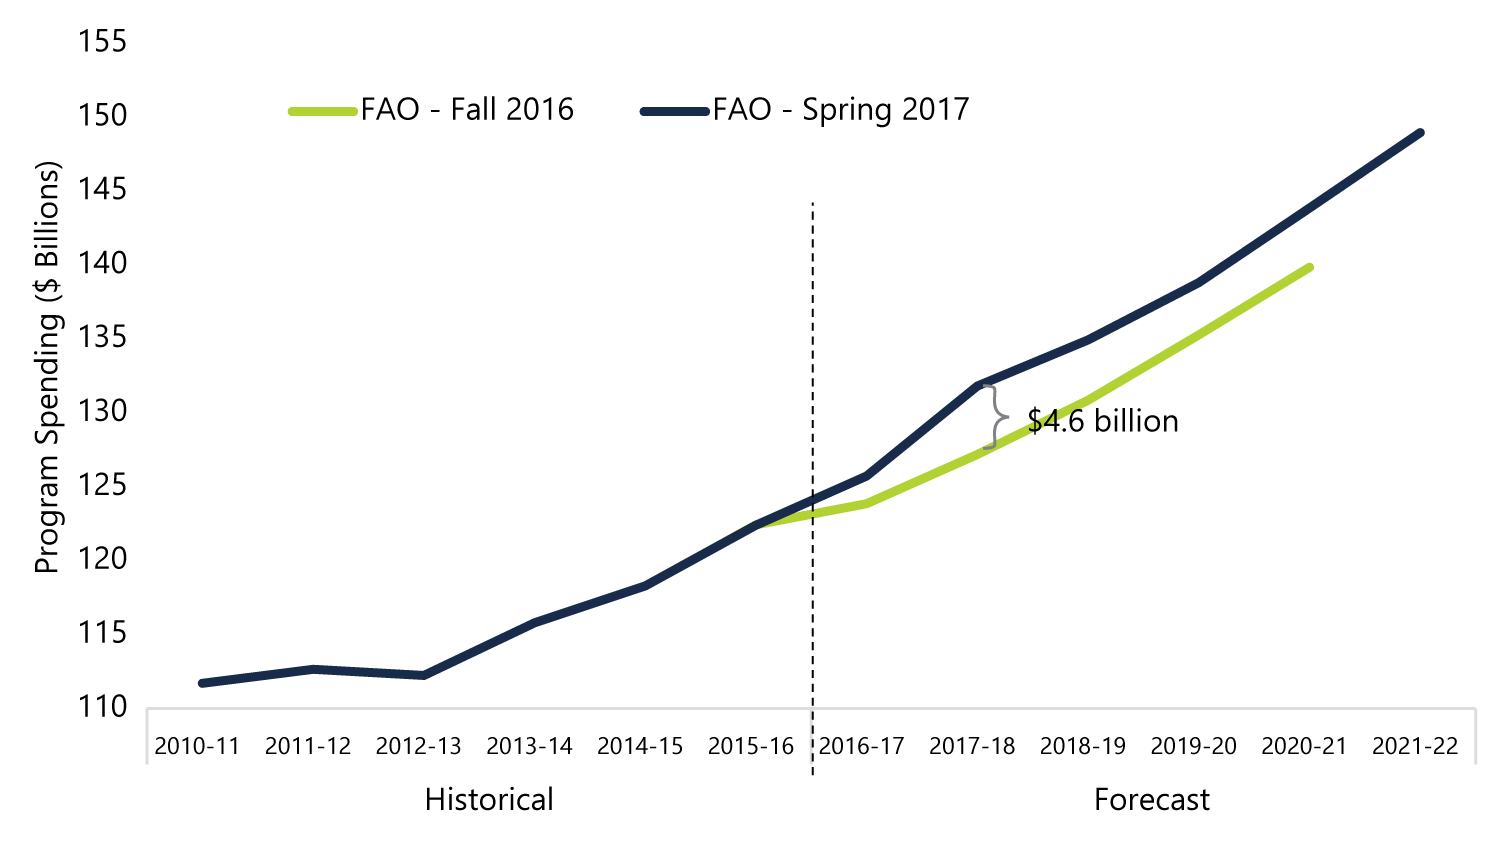 Program Expense Higher than Projected in the Fall